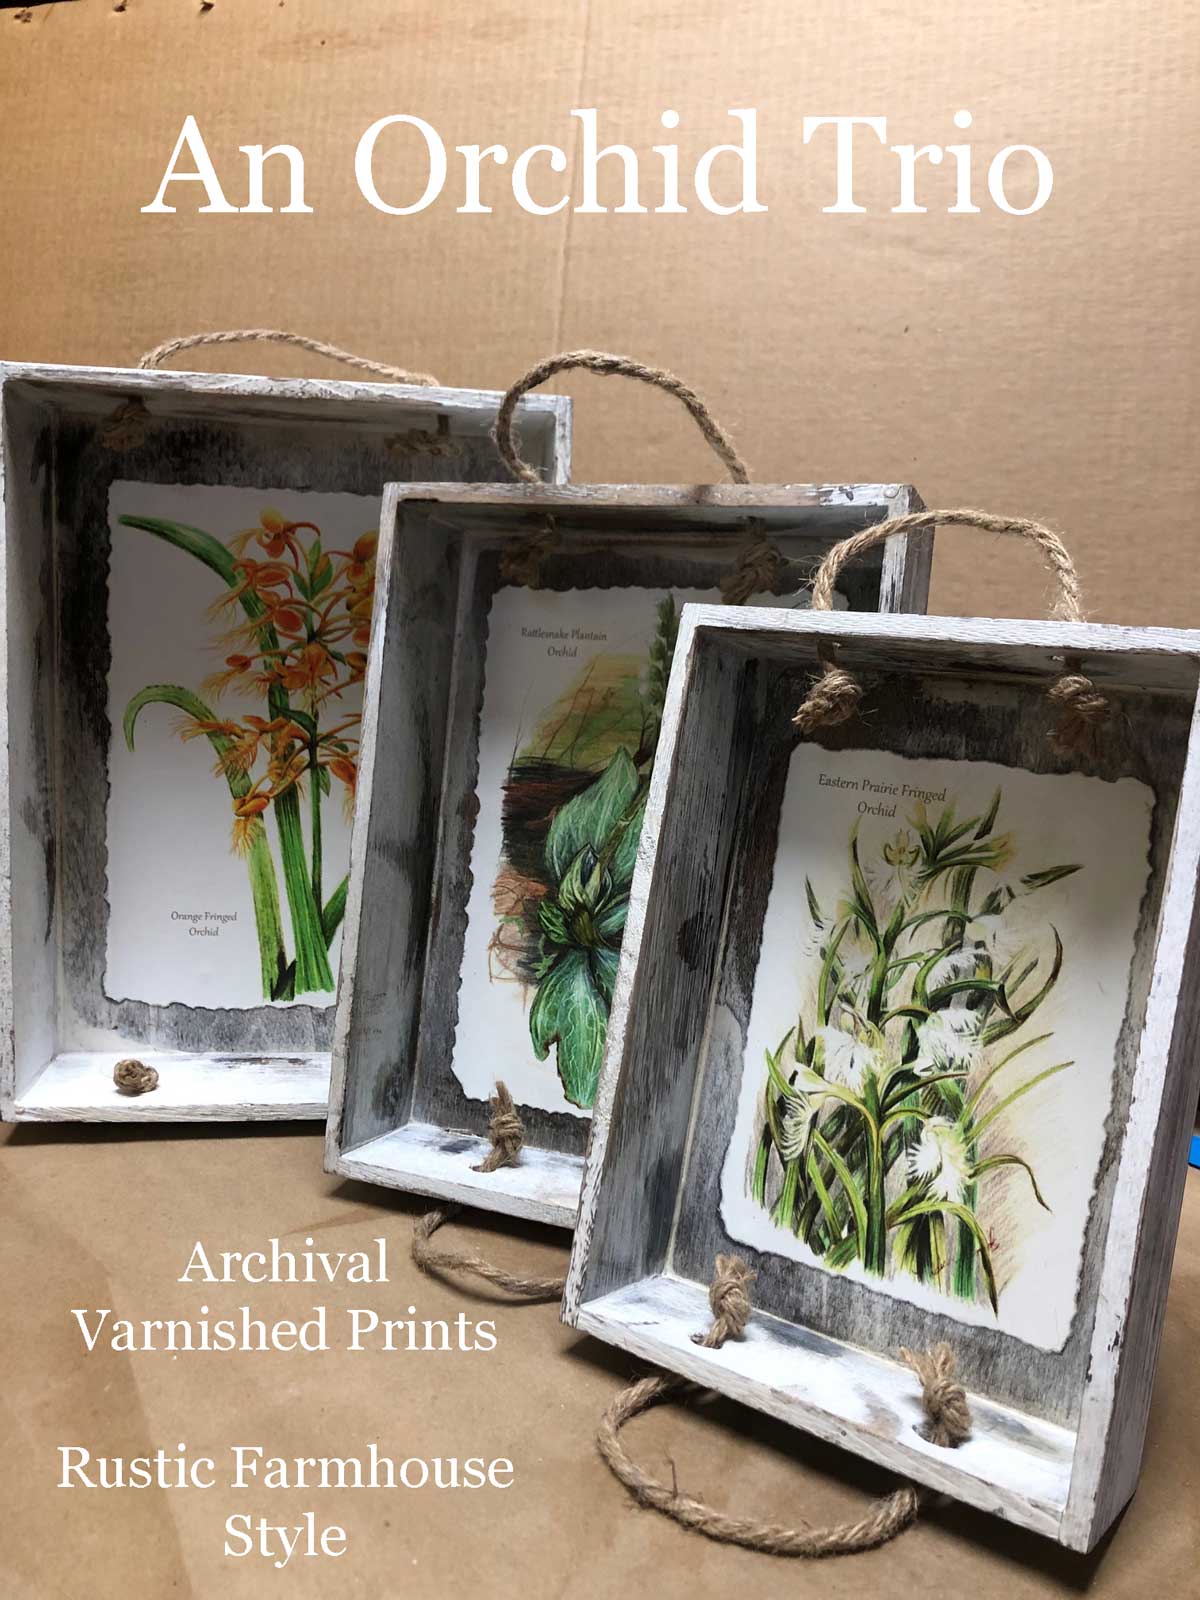 Framed and varnished prints of orchid drawings by Madison Woods.